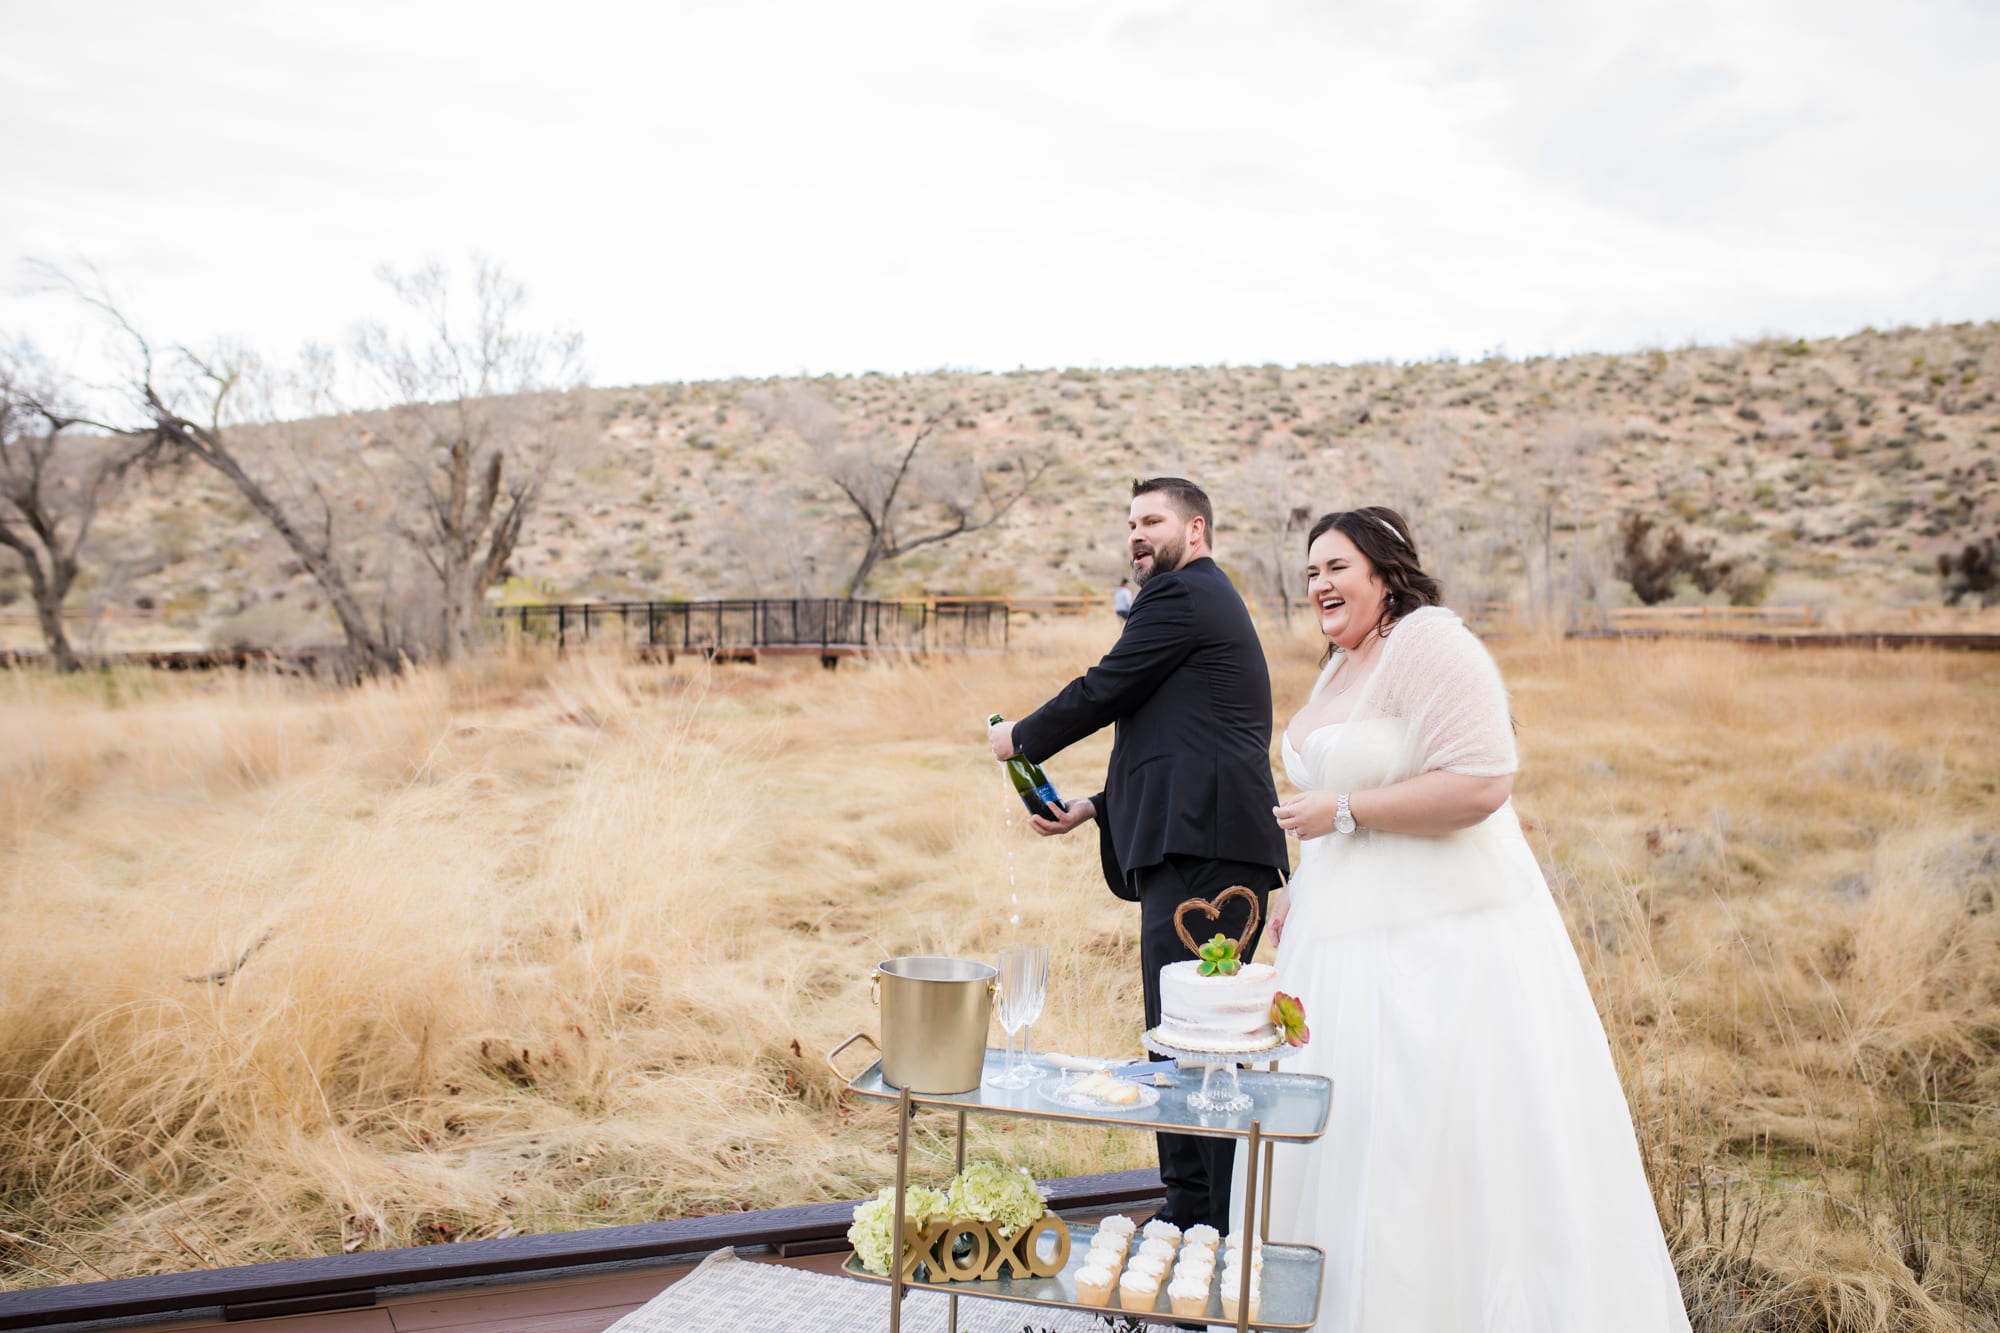 Laura + Geoffrey: A Real Wedding at Red Rock Canyon